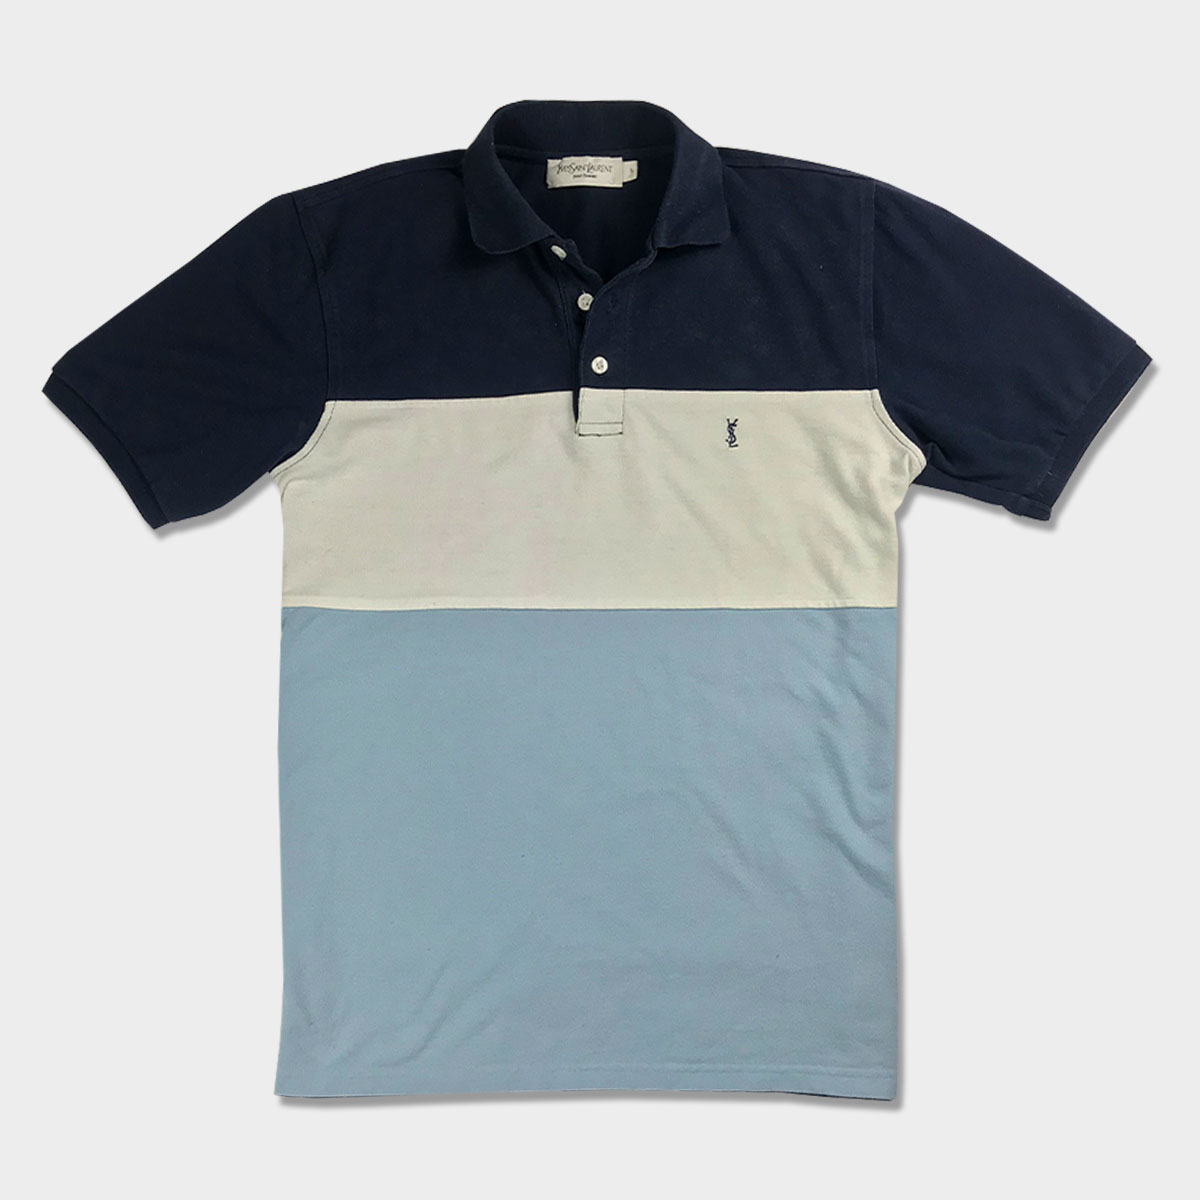 What's wrong sit Expression MENS YVES SAINT LAURENT YSL POLO SHIRT | COLOUR BLOCK | NAVY/WHITE/BLUE |  SMALL | 90sVillage